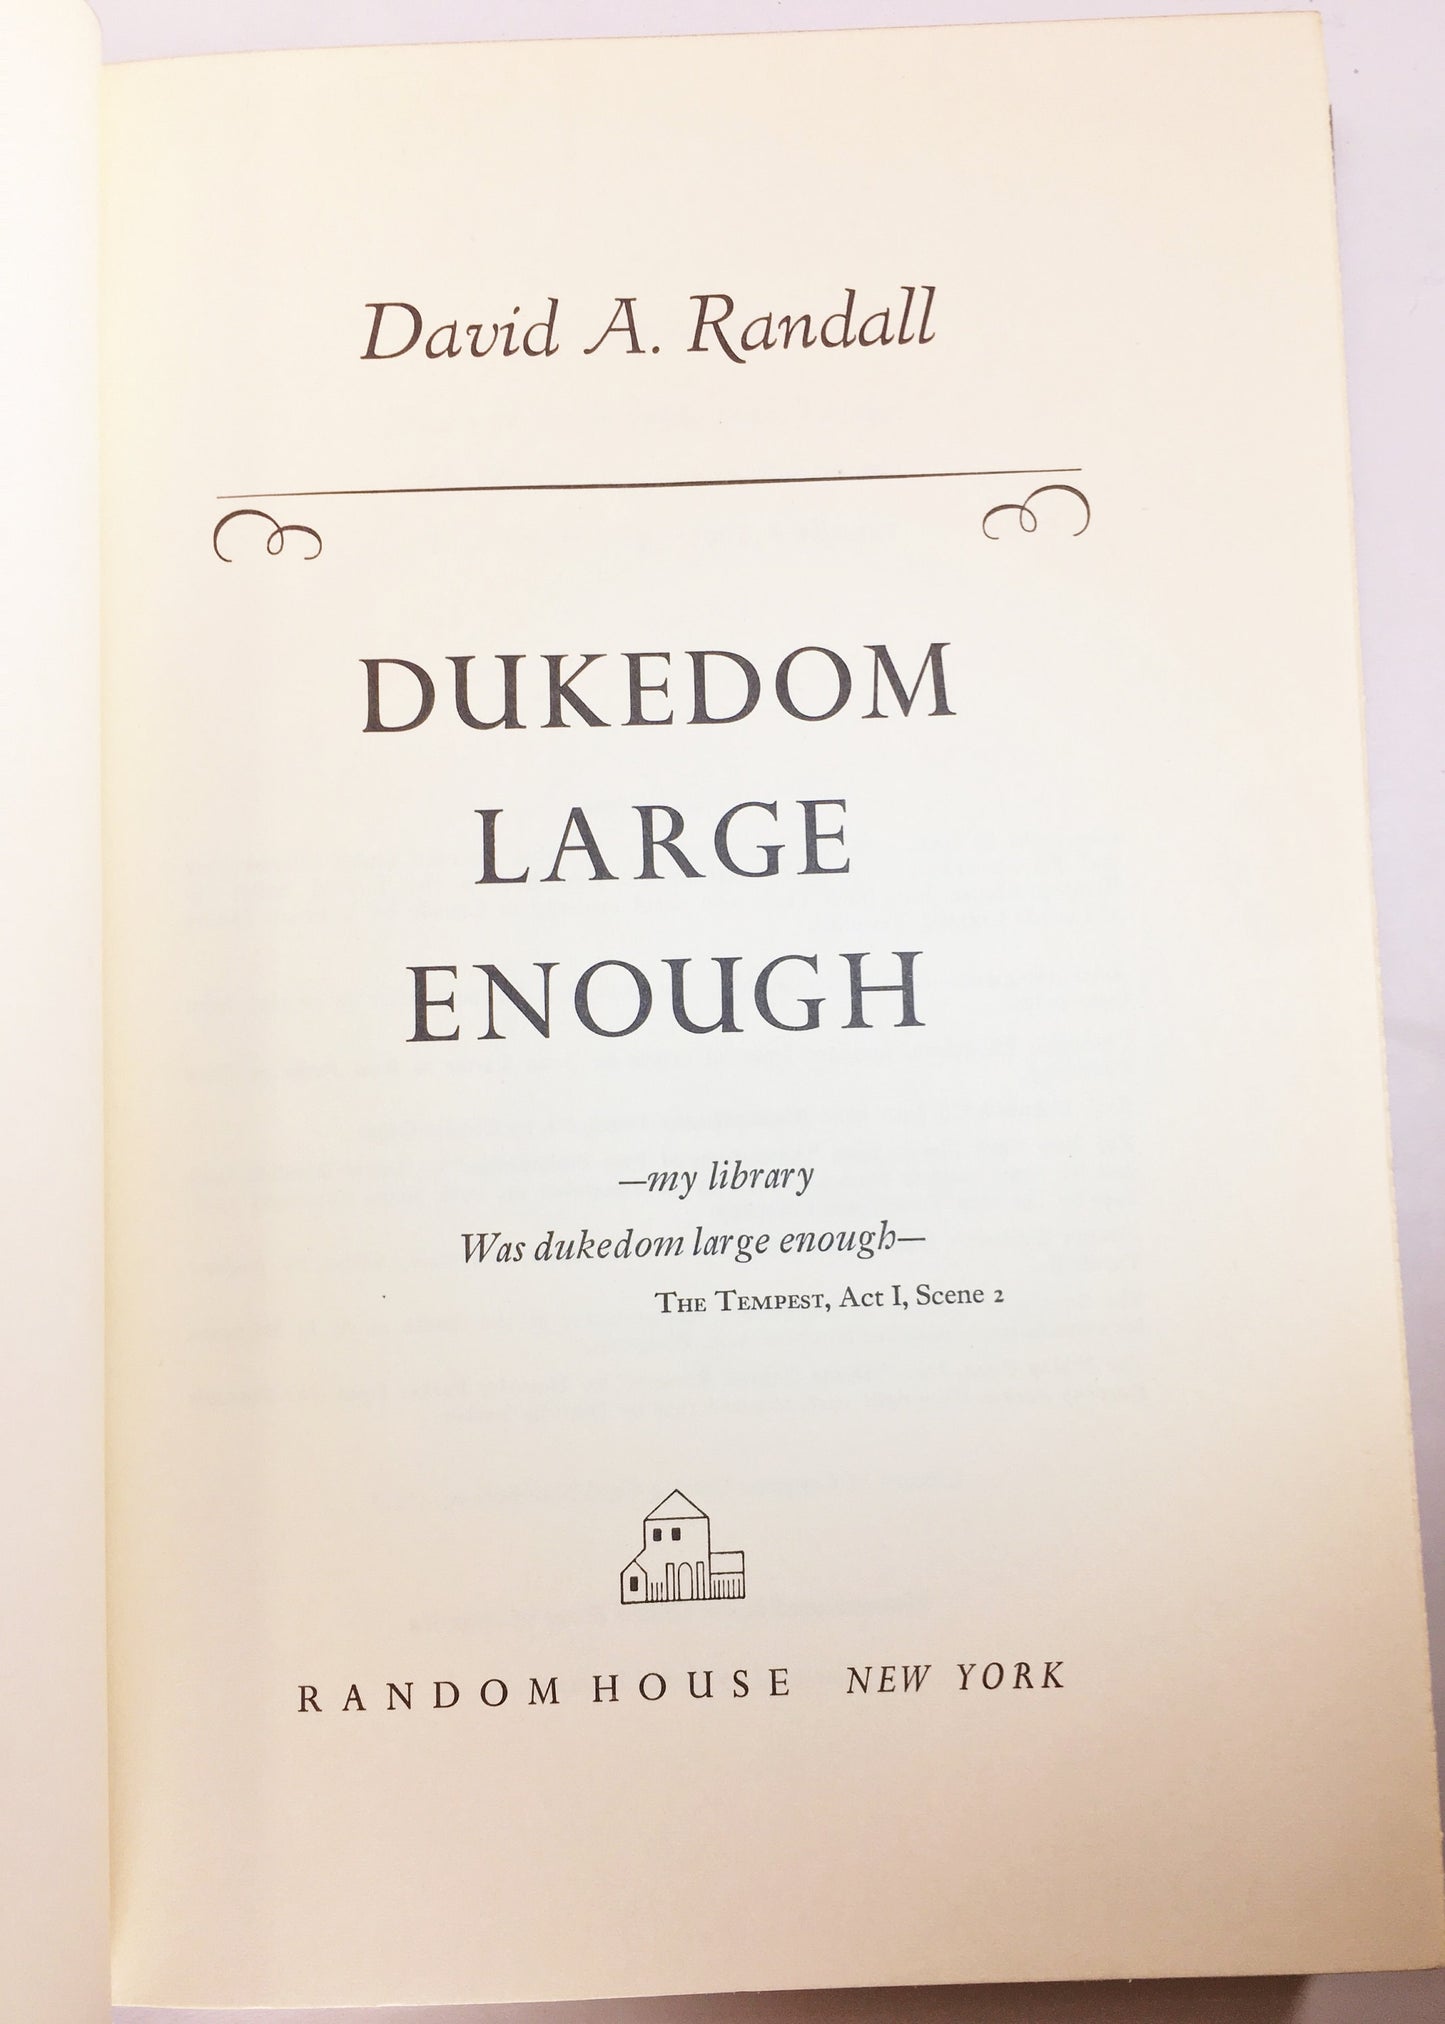 1961 Dukedom Large Enough Reminiscences of a Rare Book Dealer FIRST EDITION vintage book by David Randall. Perfect Book Collector gift.